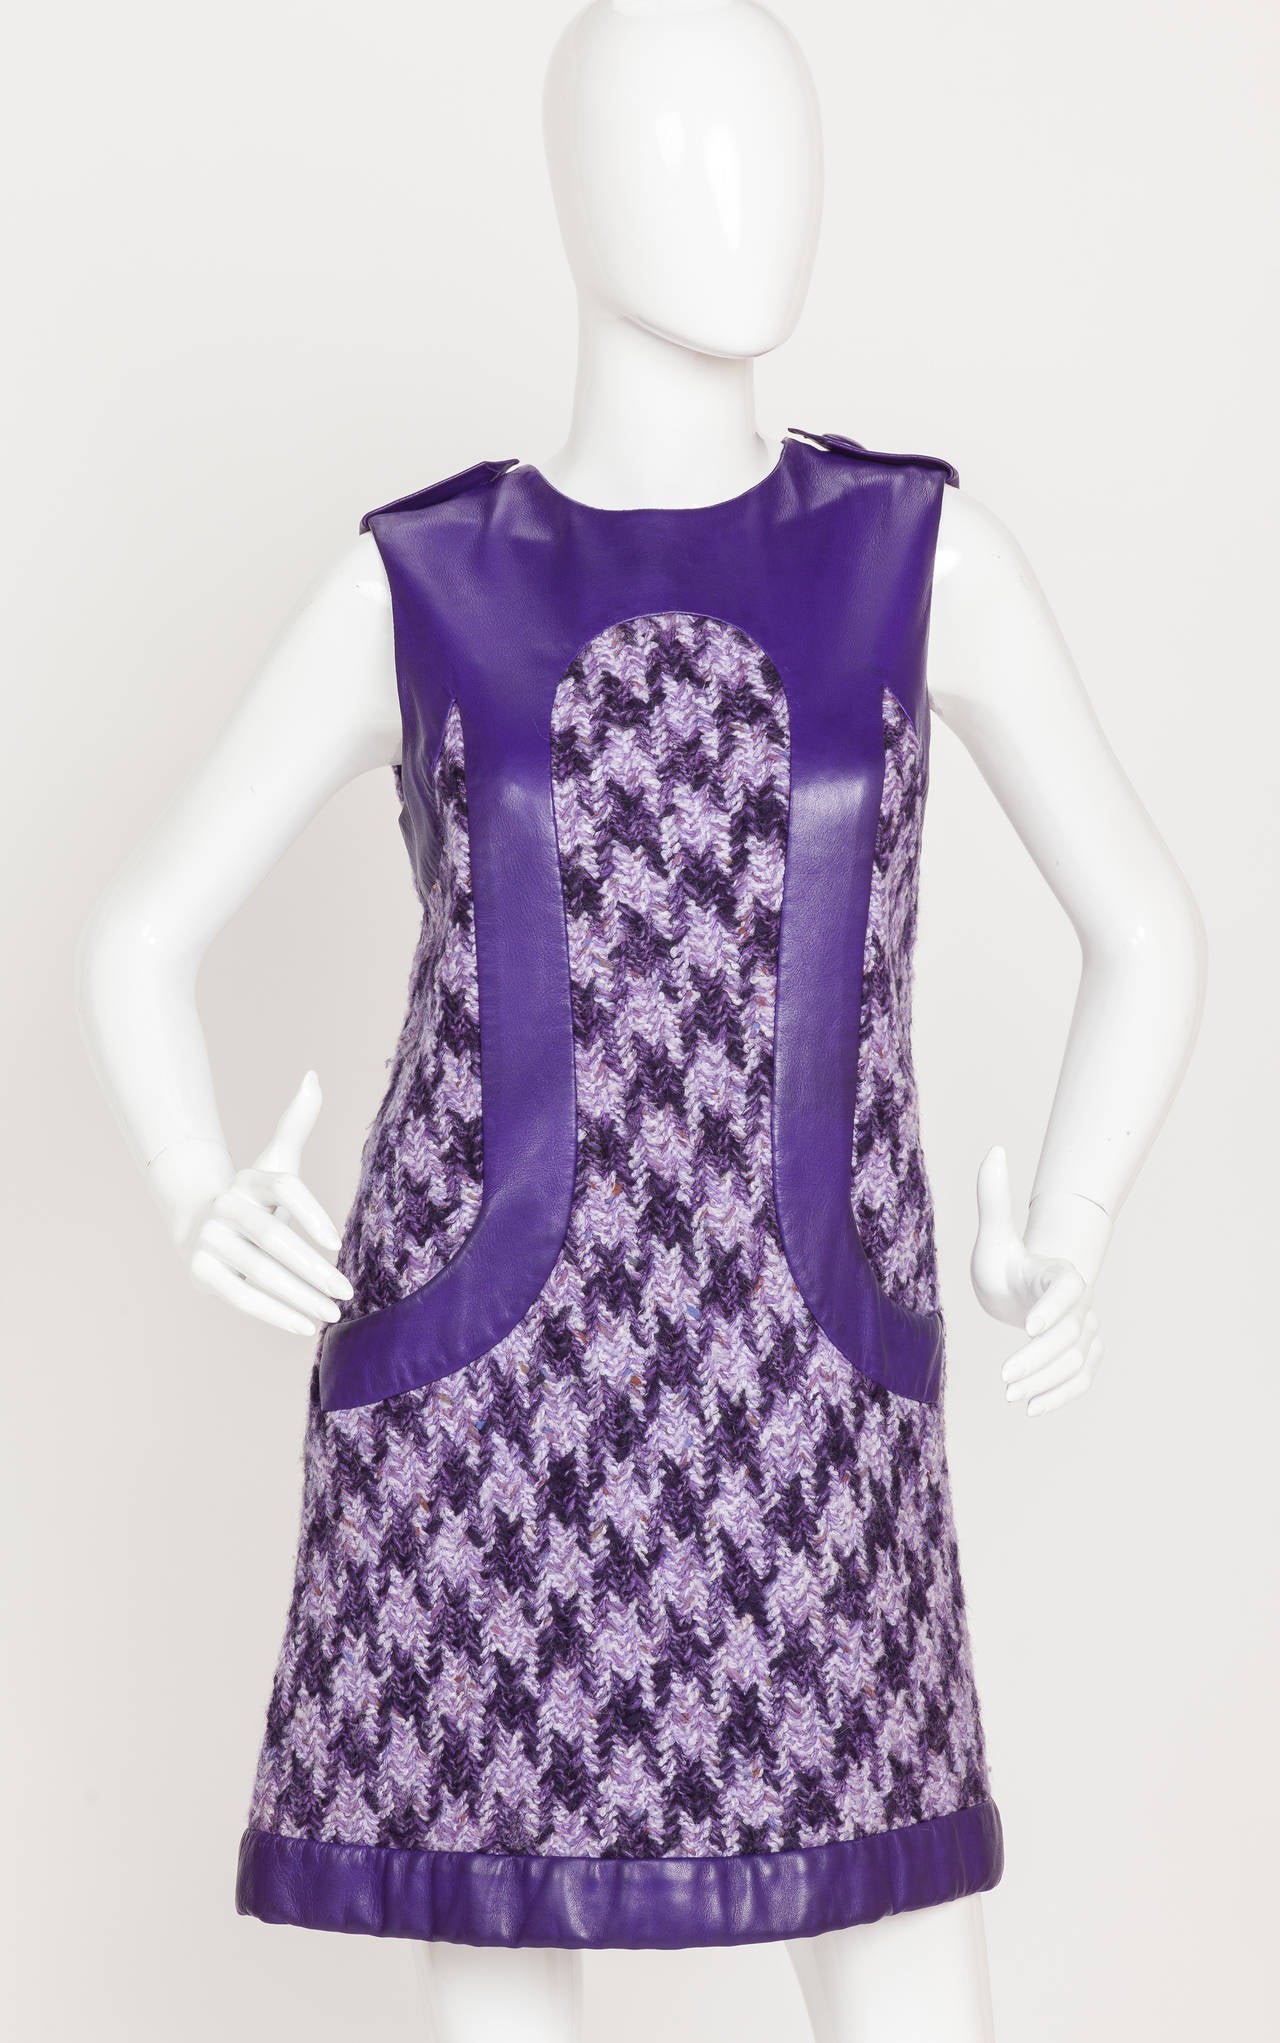 A rare 1968 Pierre Cardin haute couture mini dress made of oversize herringbone wool tweed with supple purple leather inserts at the neck, bust, hem and bodice front. Features hidden pockets at the termination of the curved frontal leather bands.